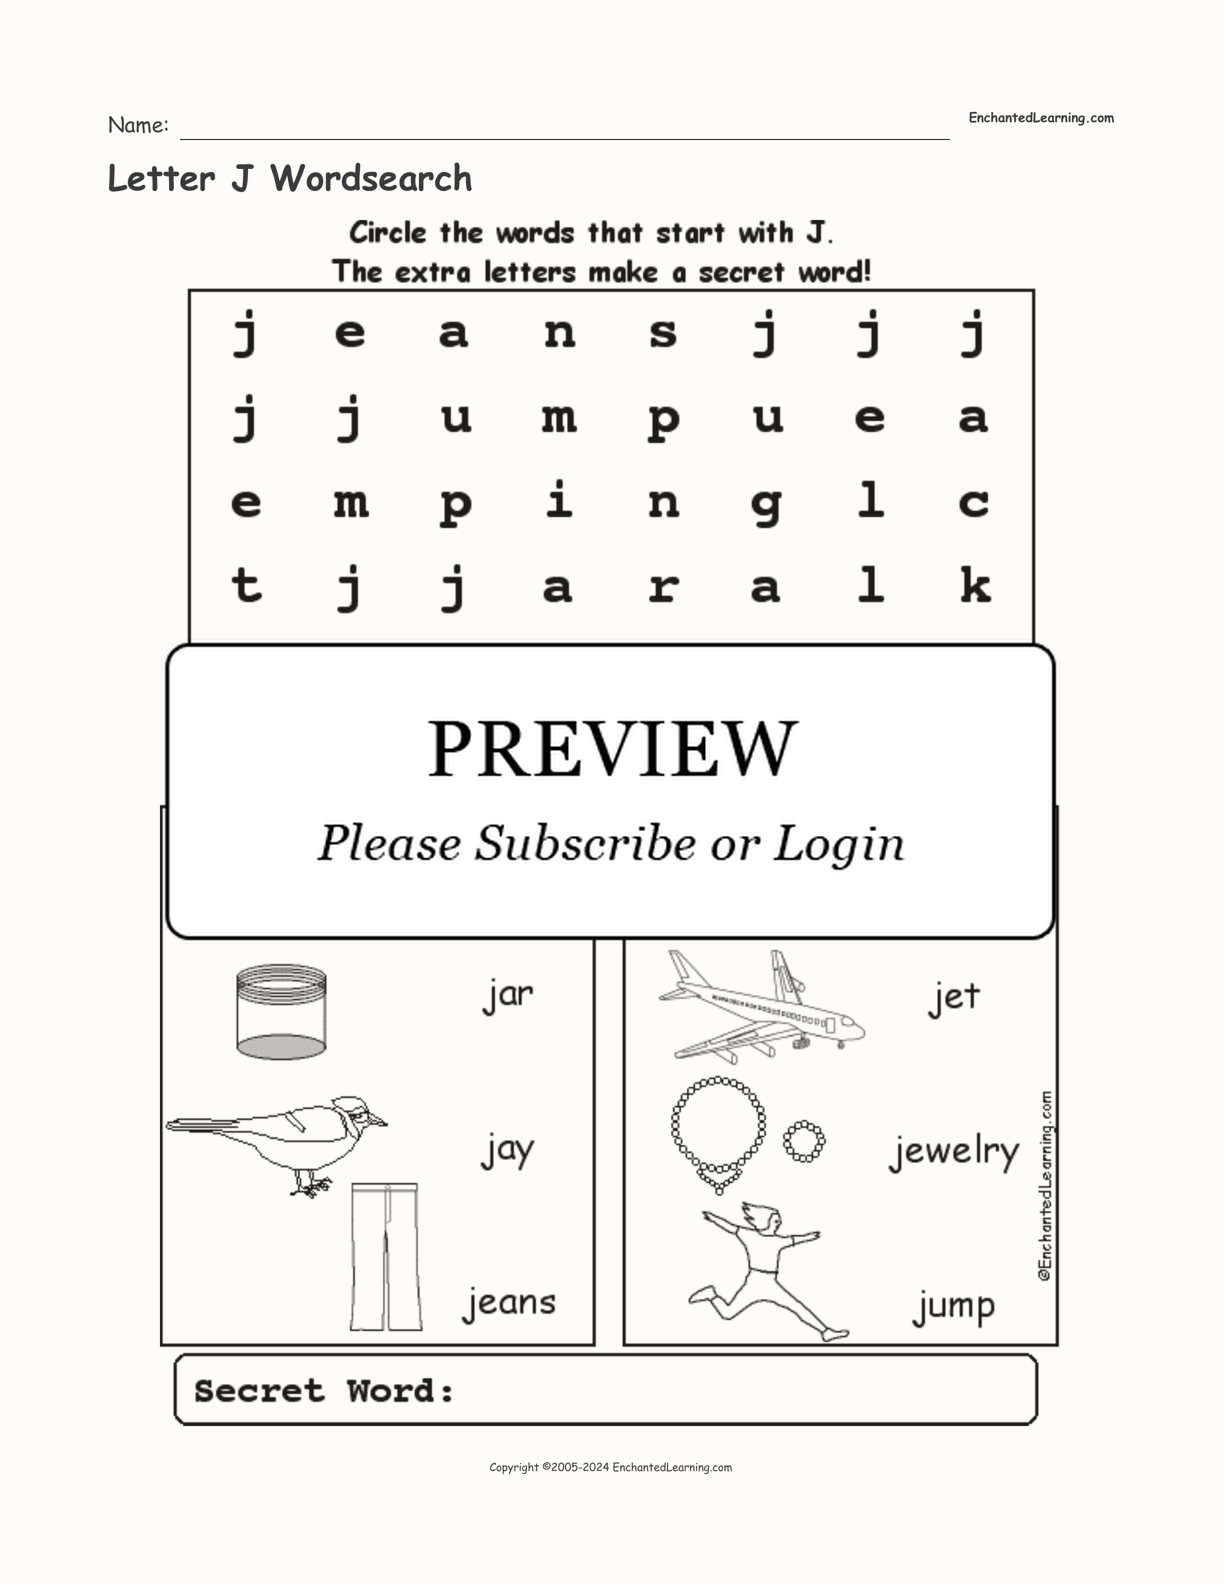 Letter J Wordsearch interactive worksheet page 1